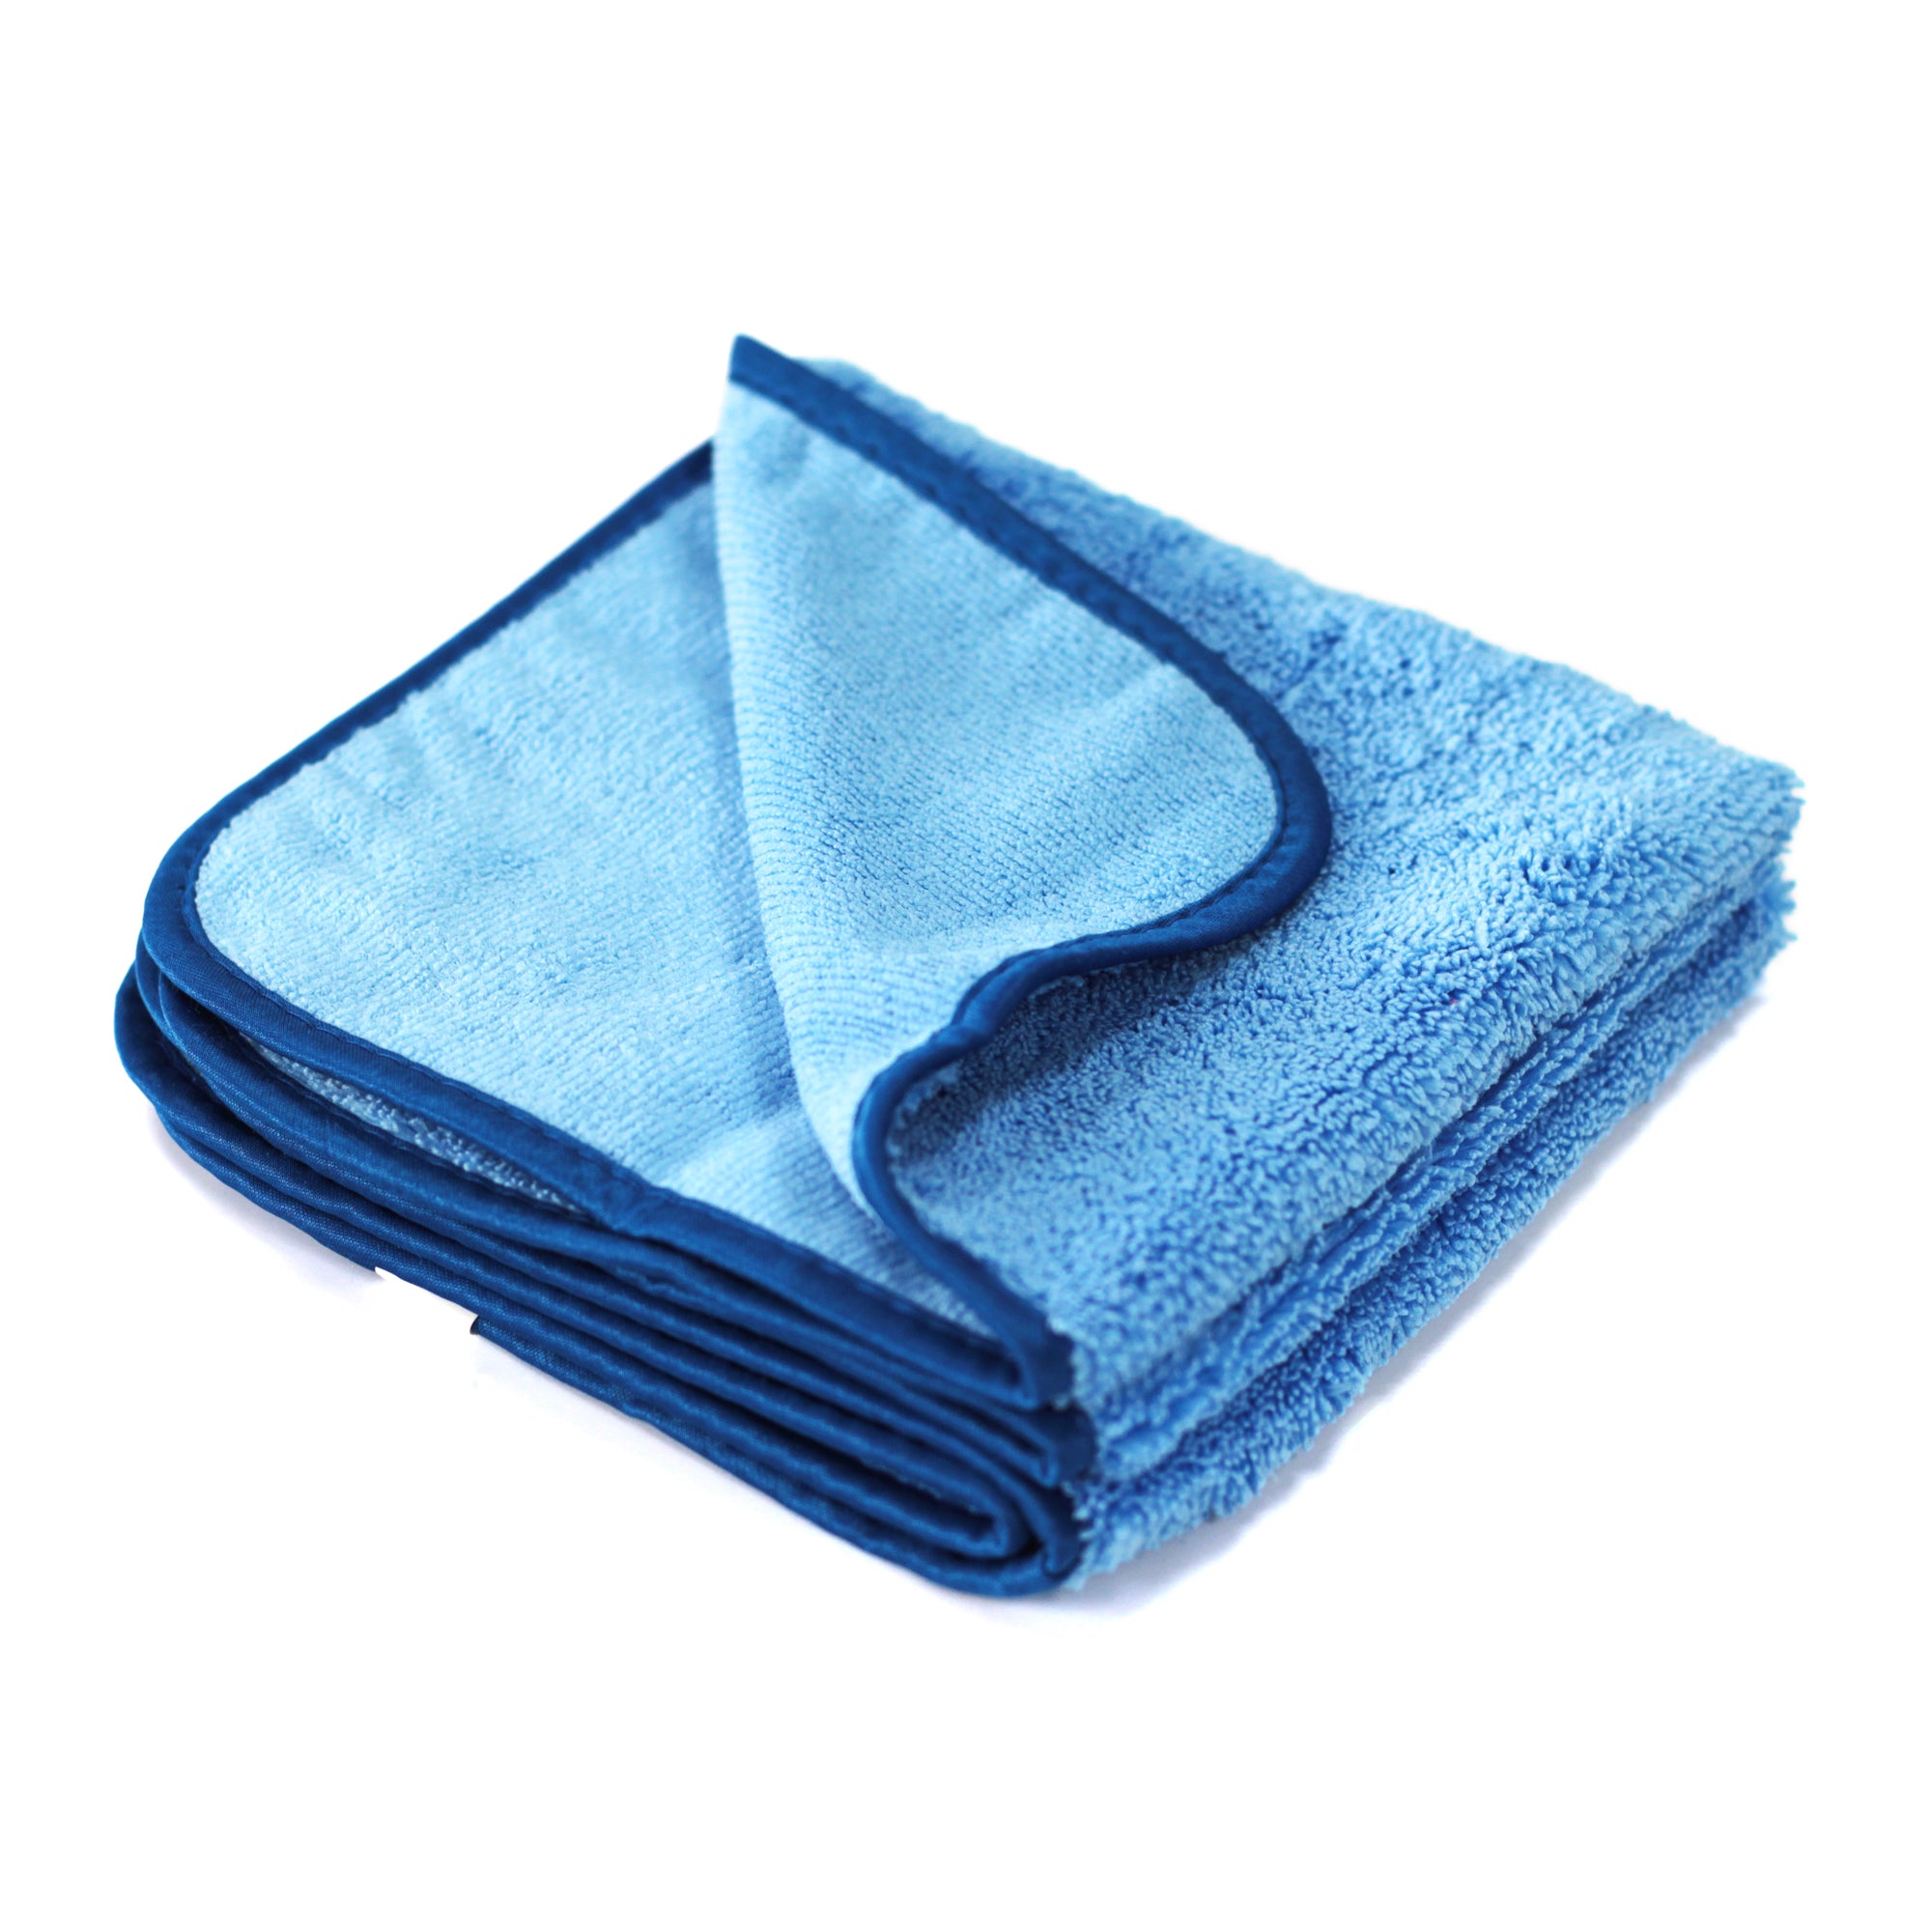  Bait Towel 6 Pack Gray Microfiber, 16x16, Clip : Sports &  Outdoors